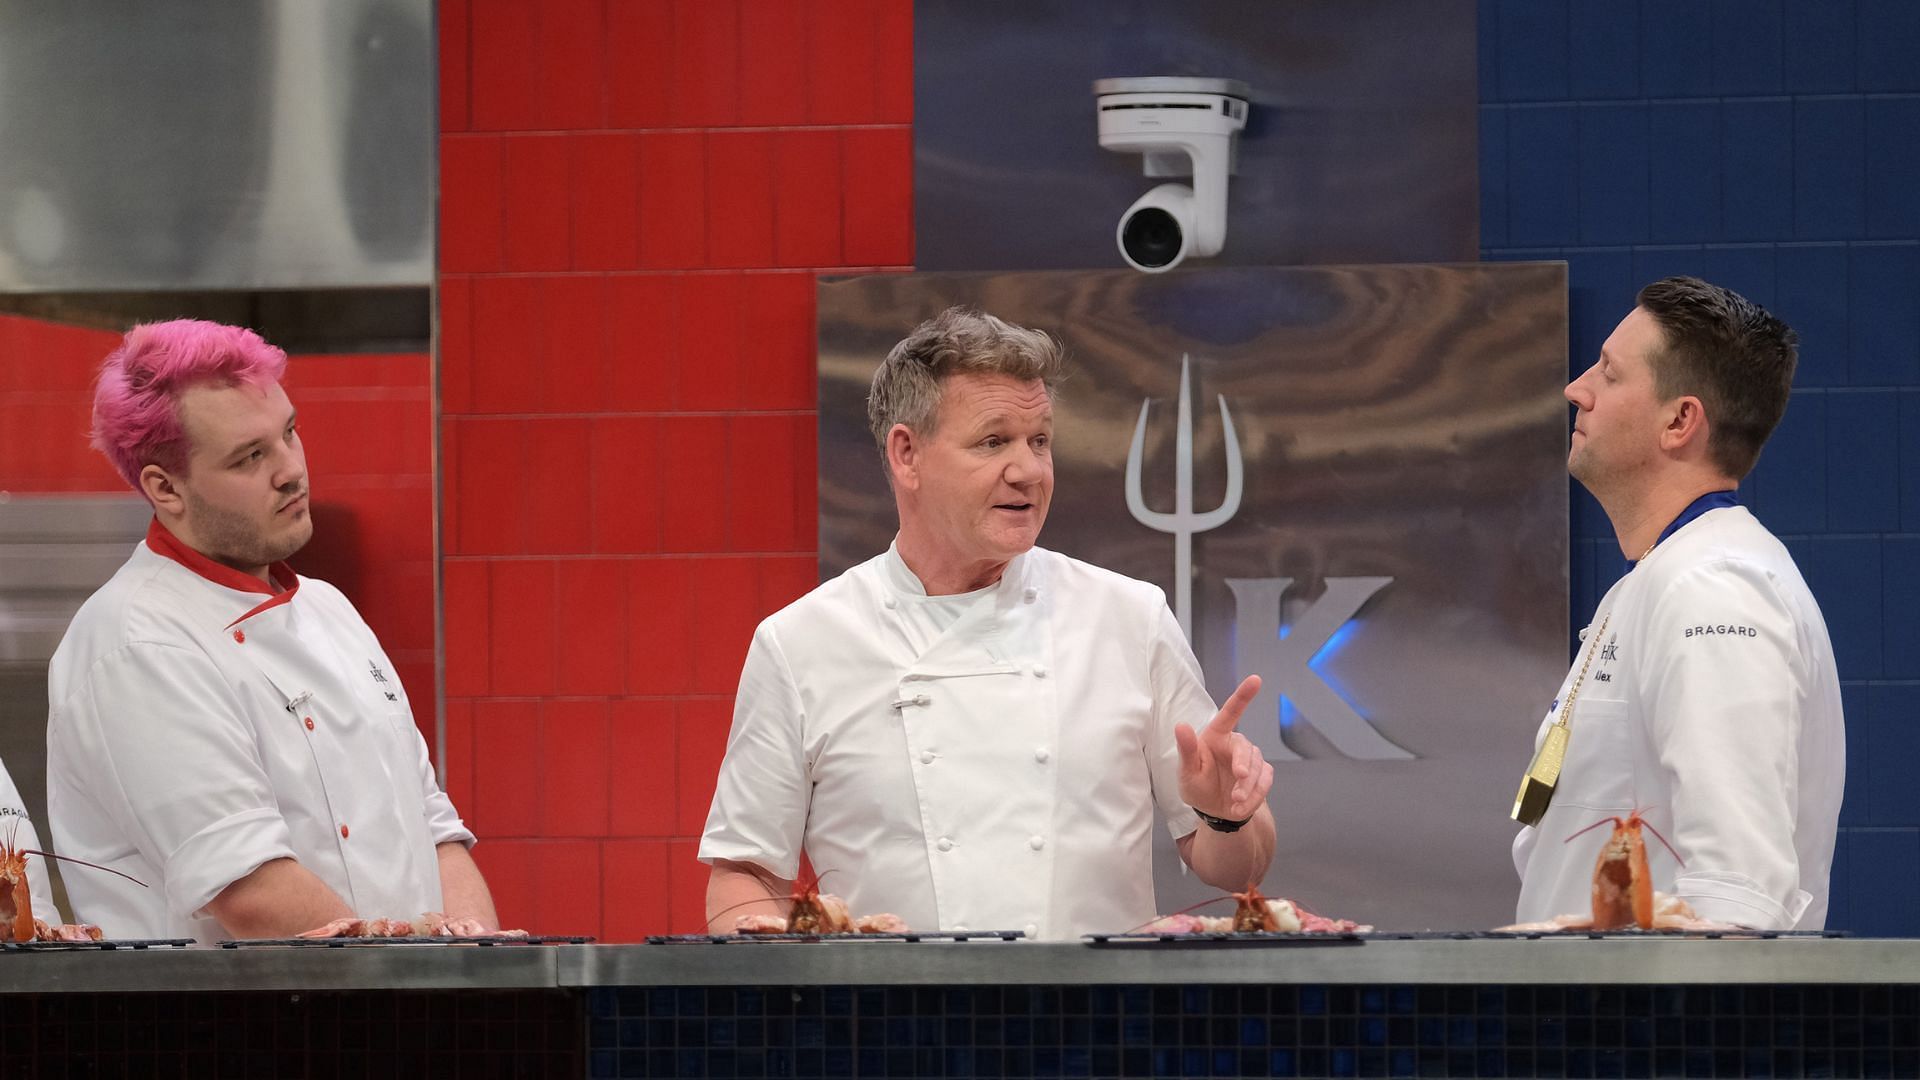 "Surreal" Chef Alex Belew on working with Gordon Ramsay on Hell's